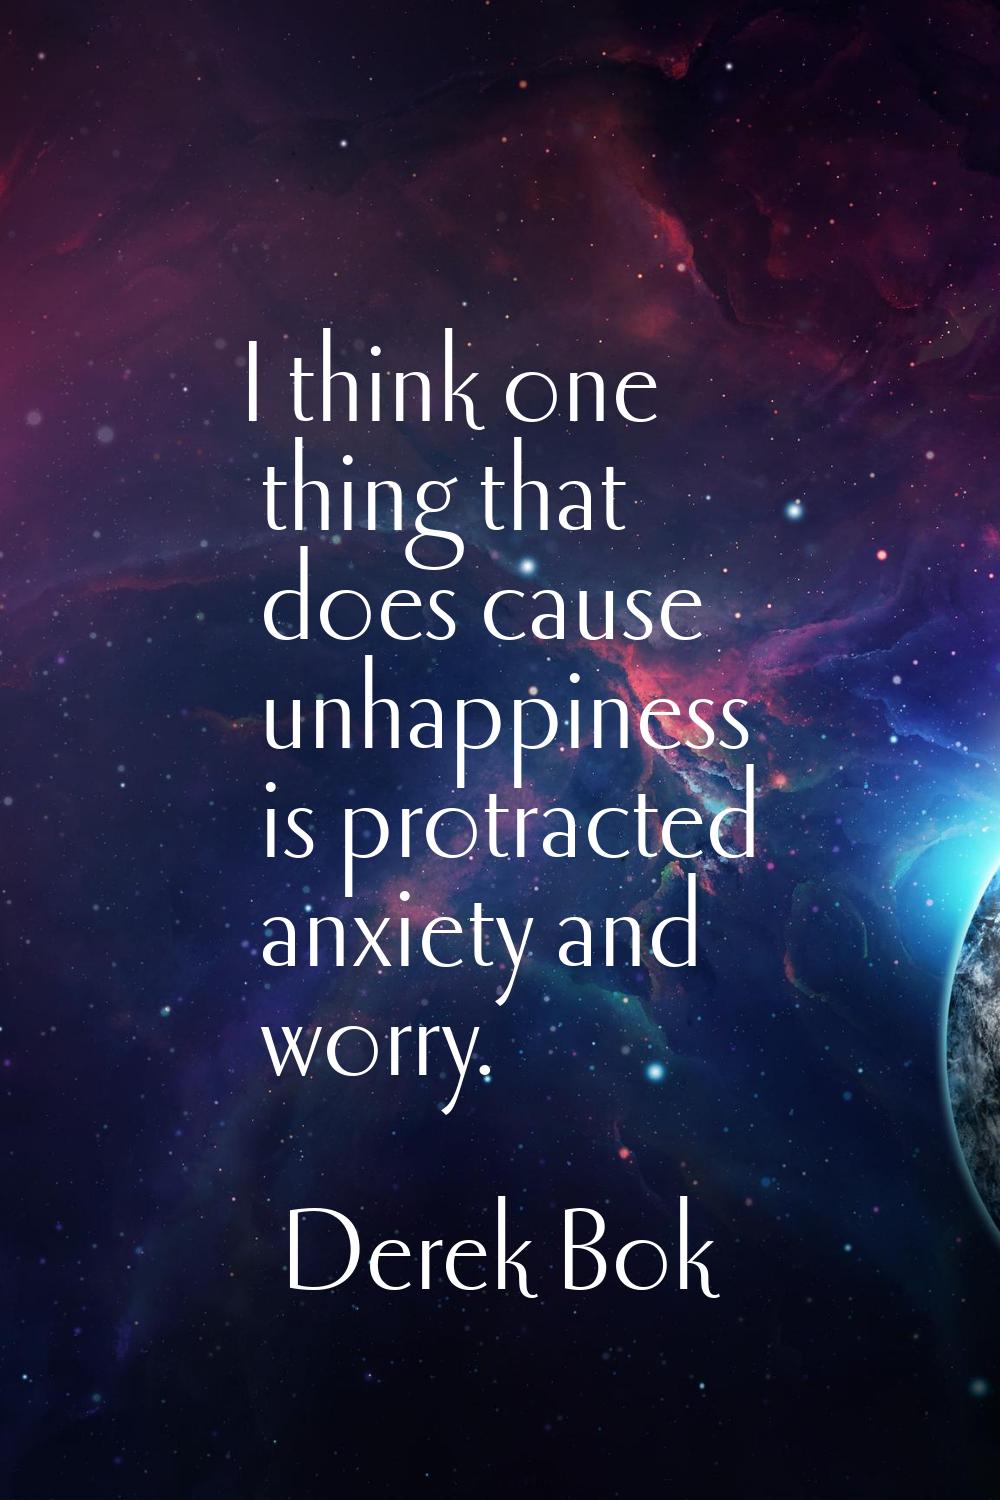 I think one thing that does cause unhappiness is protracted anxiety and worry.